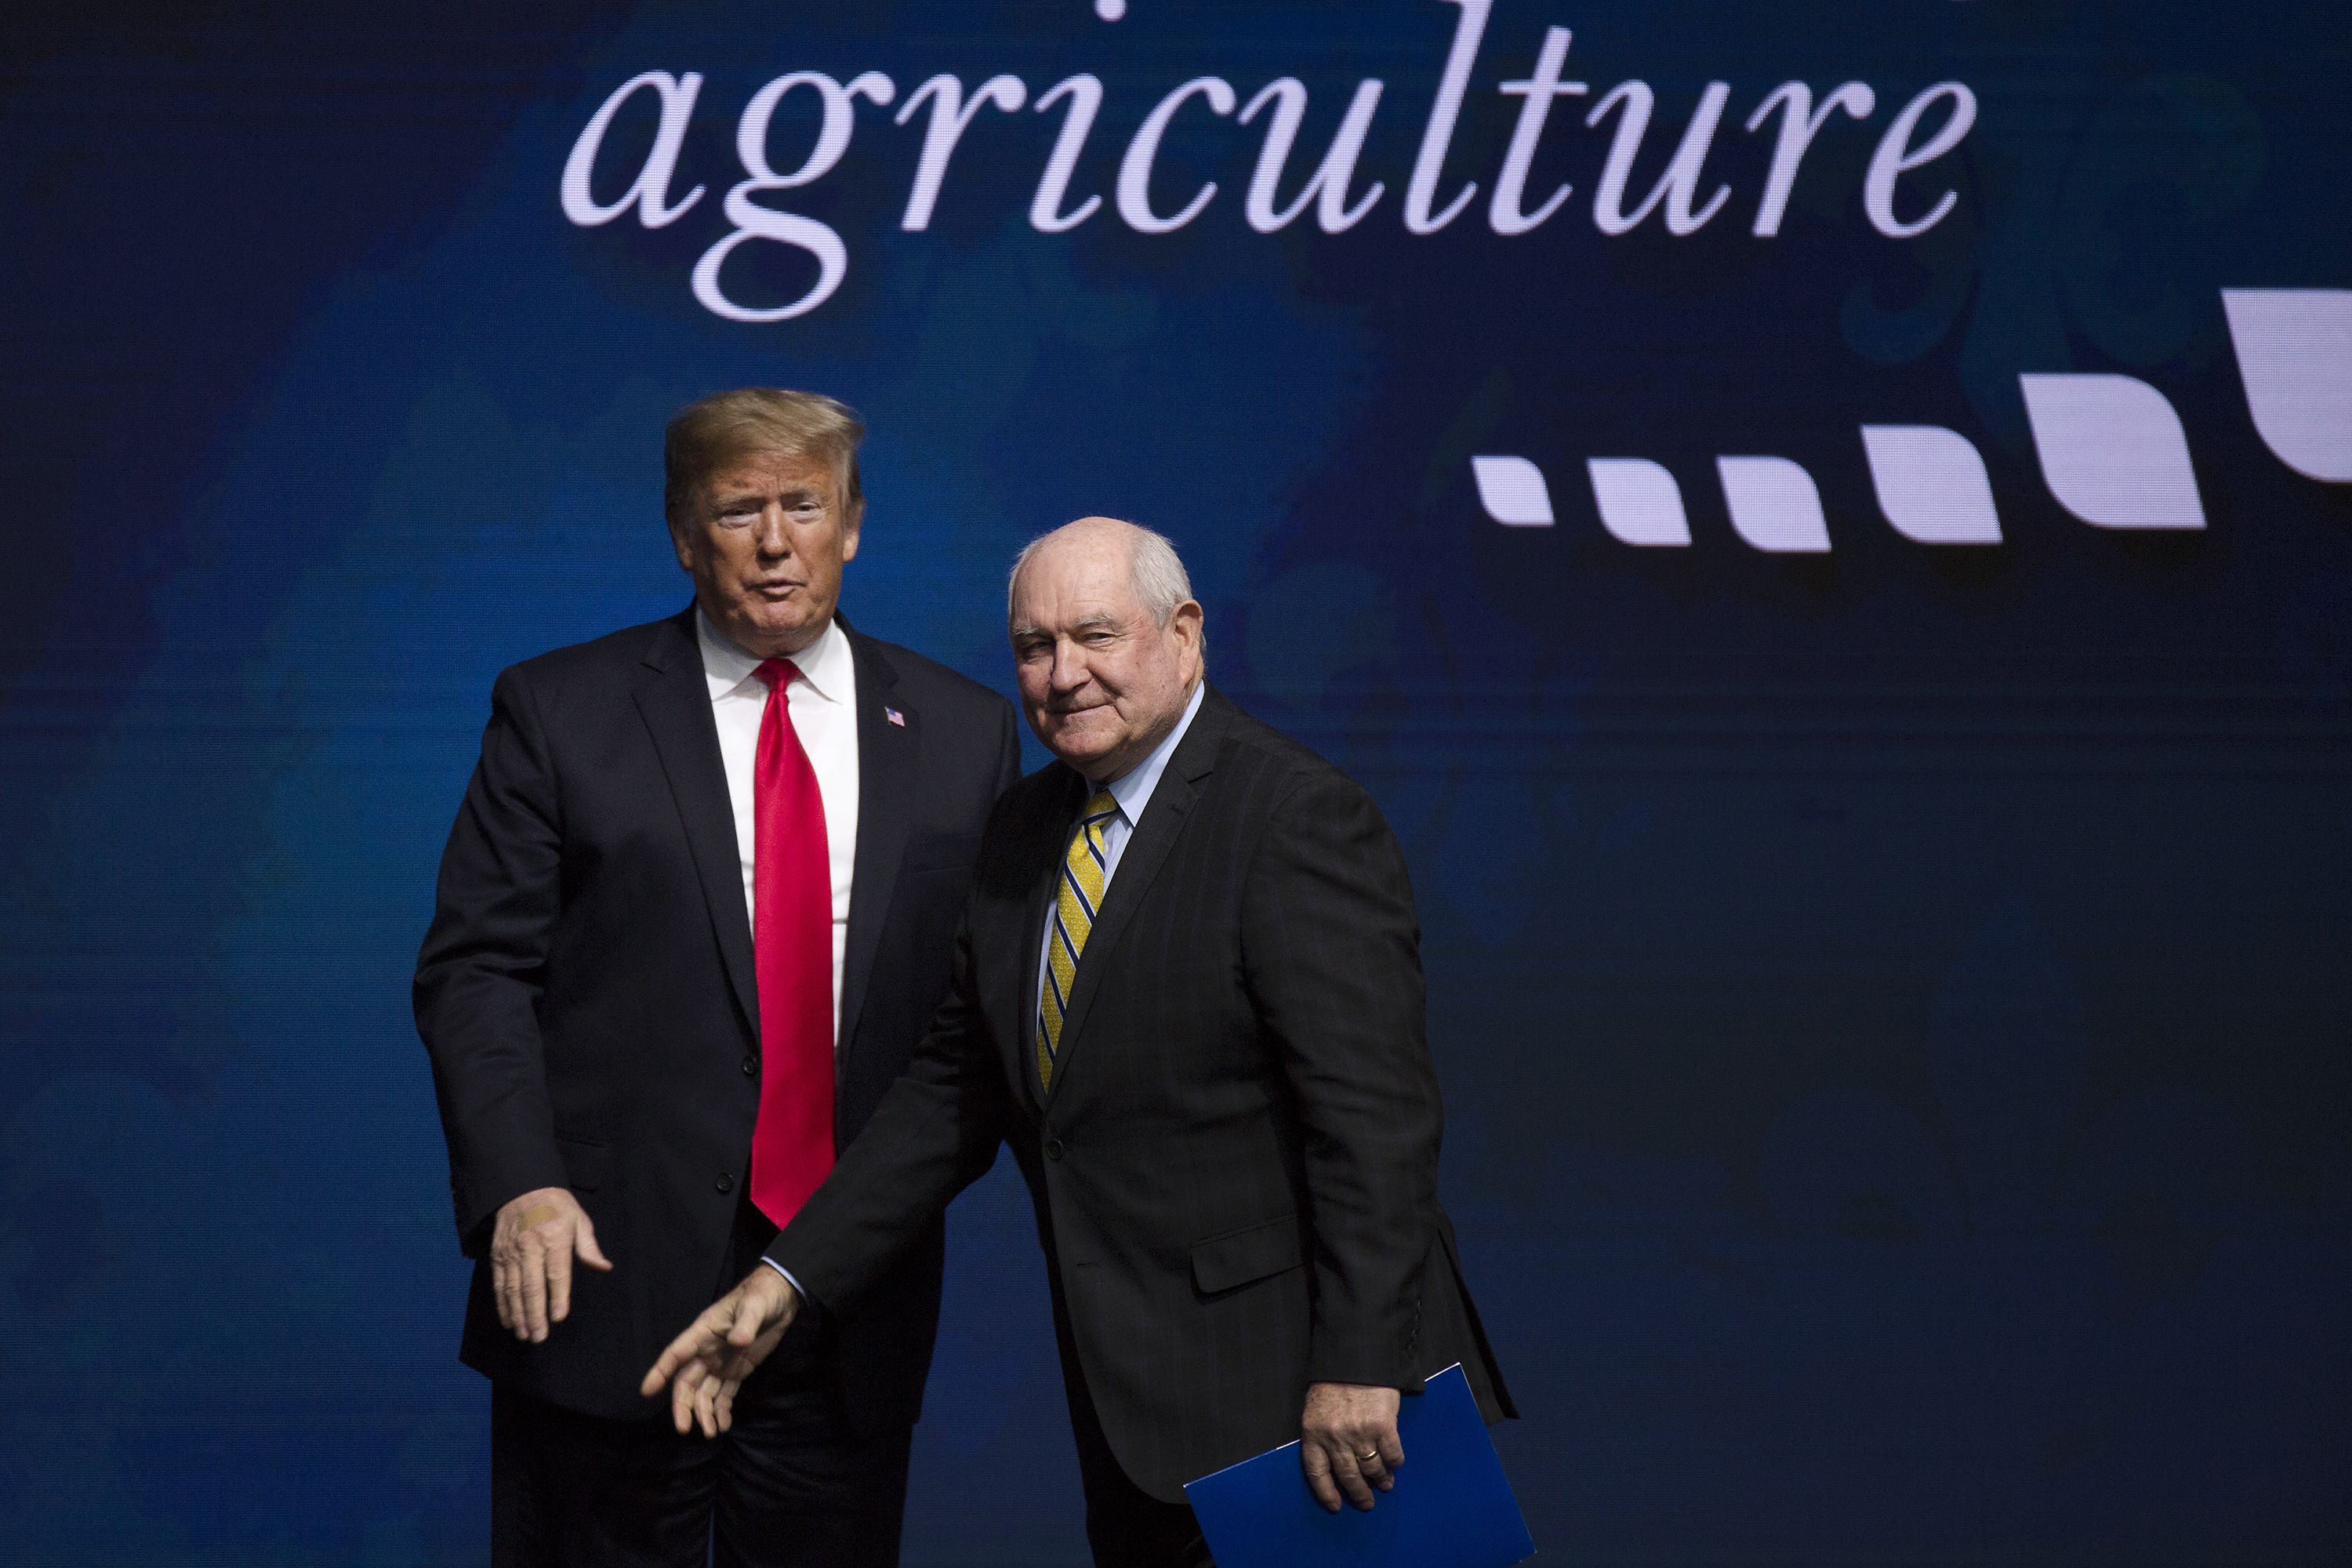 USDA's plan to move research agencies to Midwest starts a brain drain